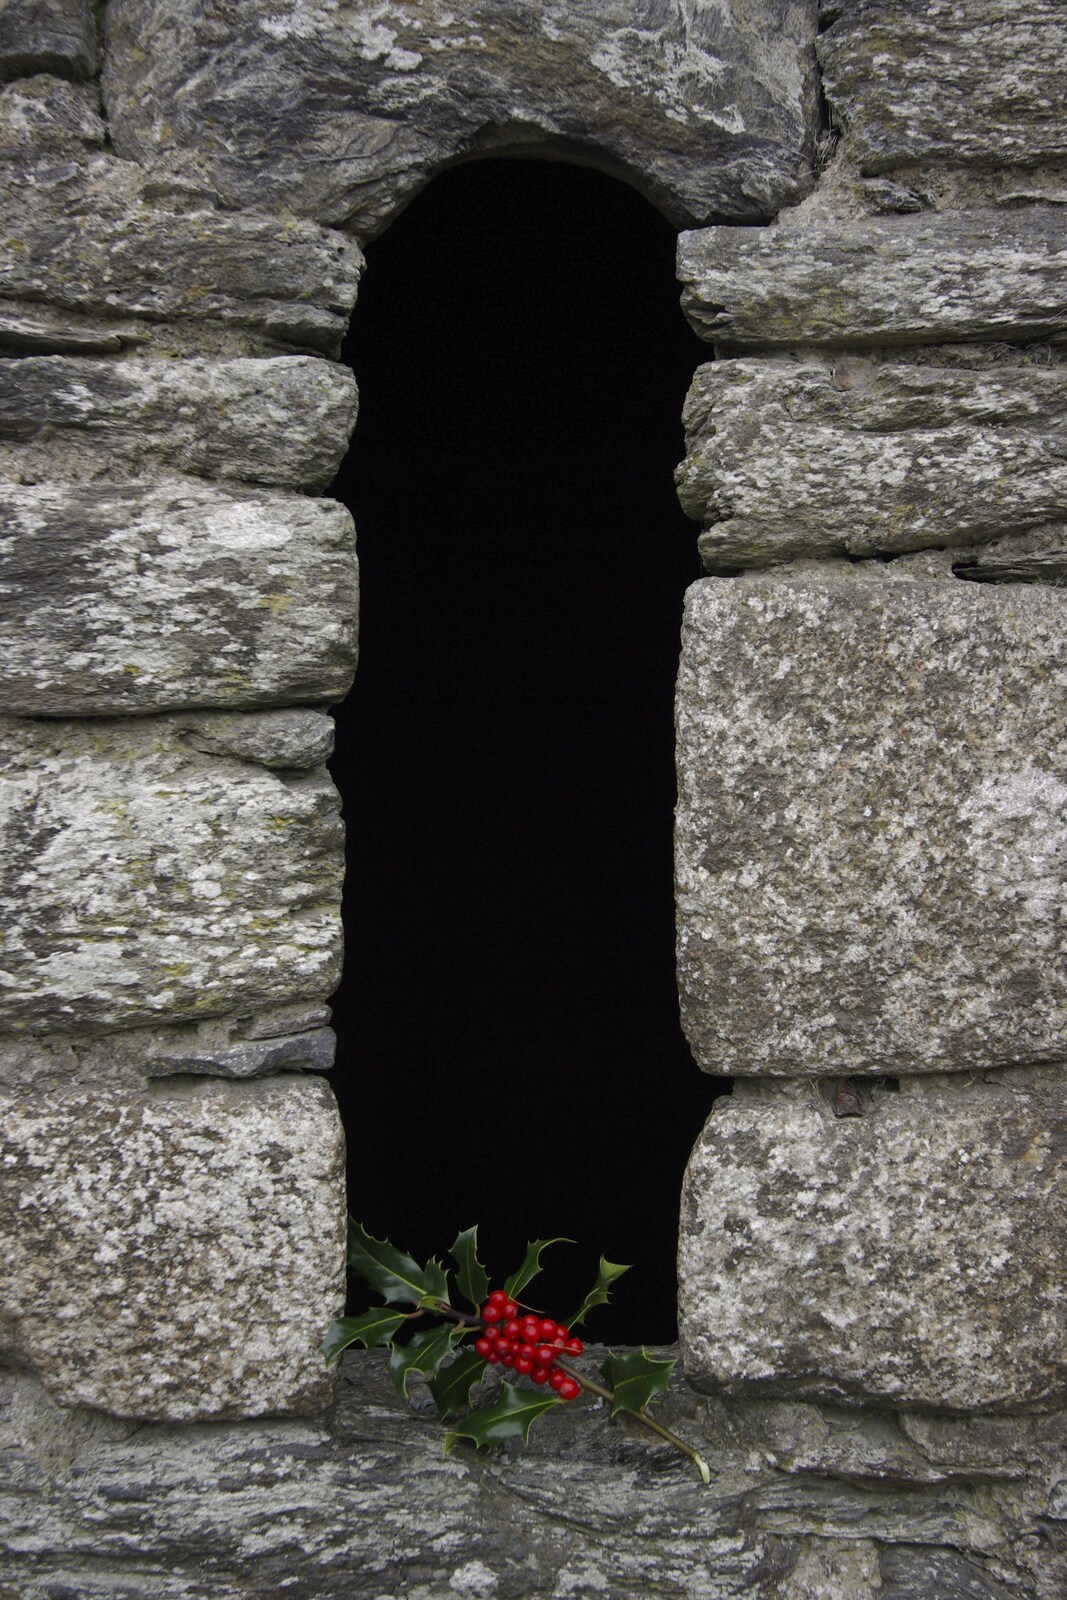 A sprig of holly in the ruins of a priest's house from Reflections: A Day at Glendalough, County Wicklow, Ireland - 3rd November 2007